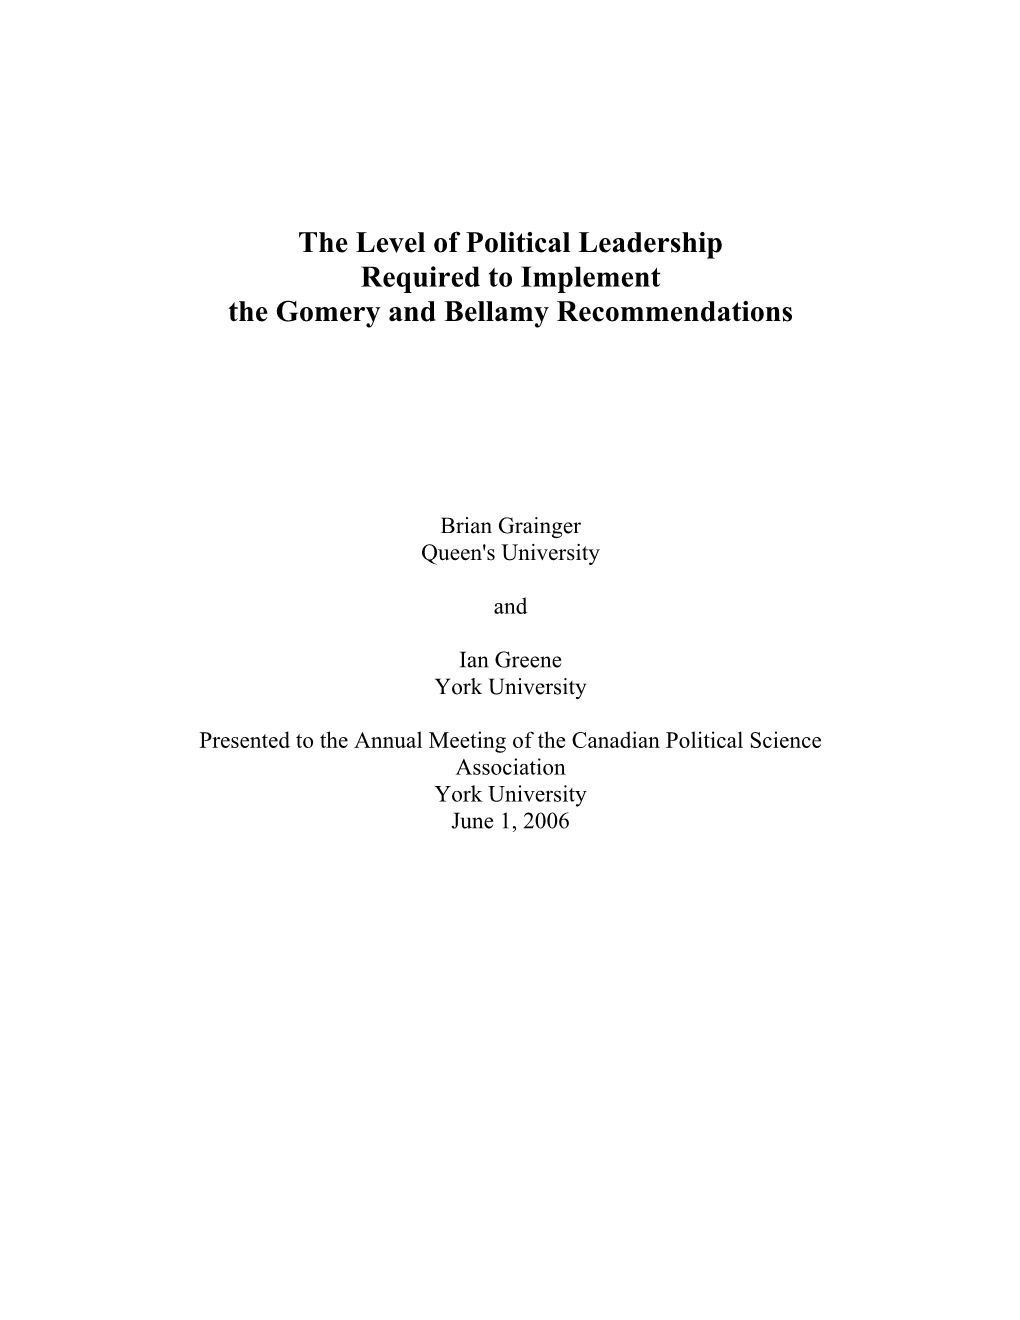 Ethics Reform and Leadership